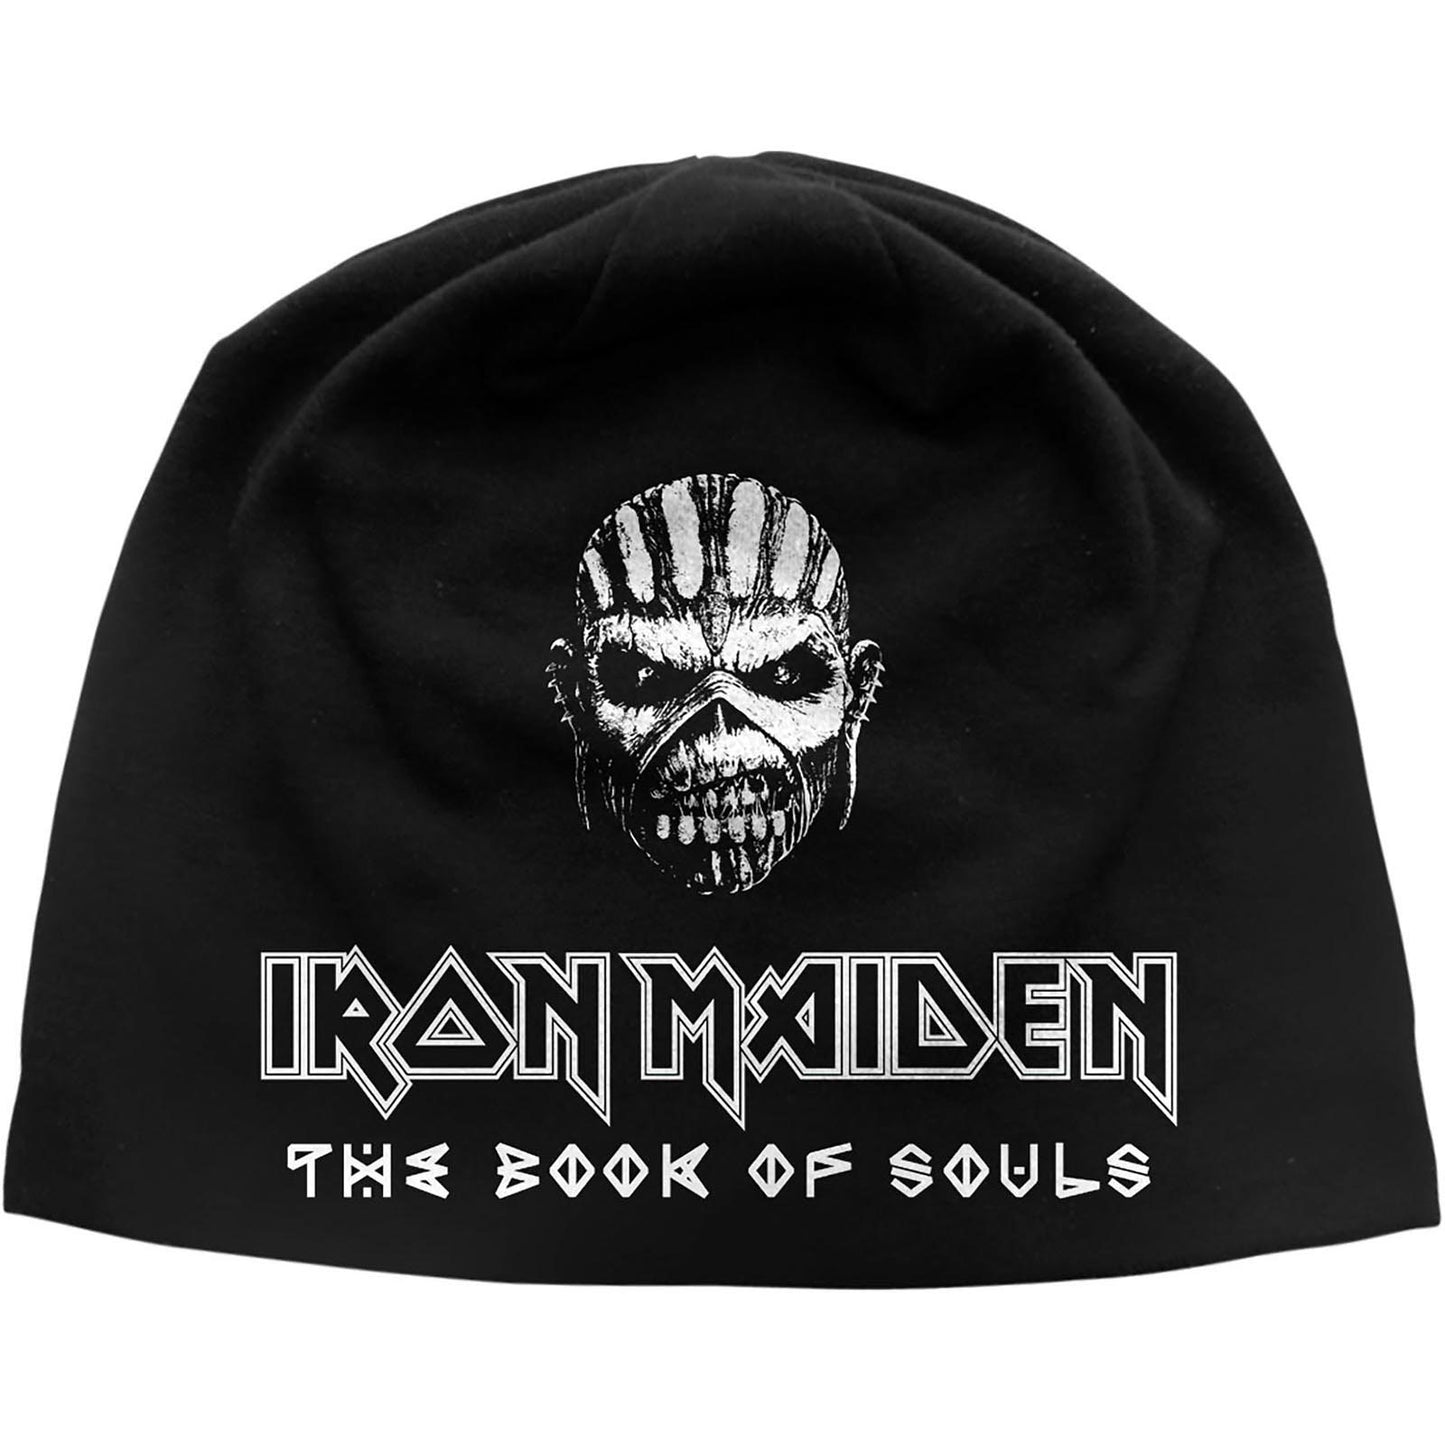 Iron Maiden Beanie Hat: The Book of Souls